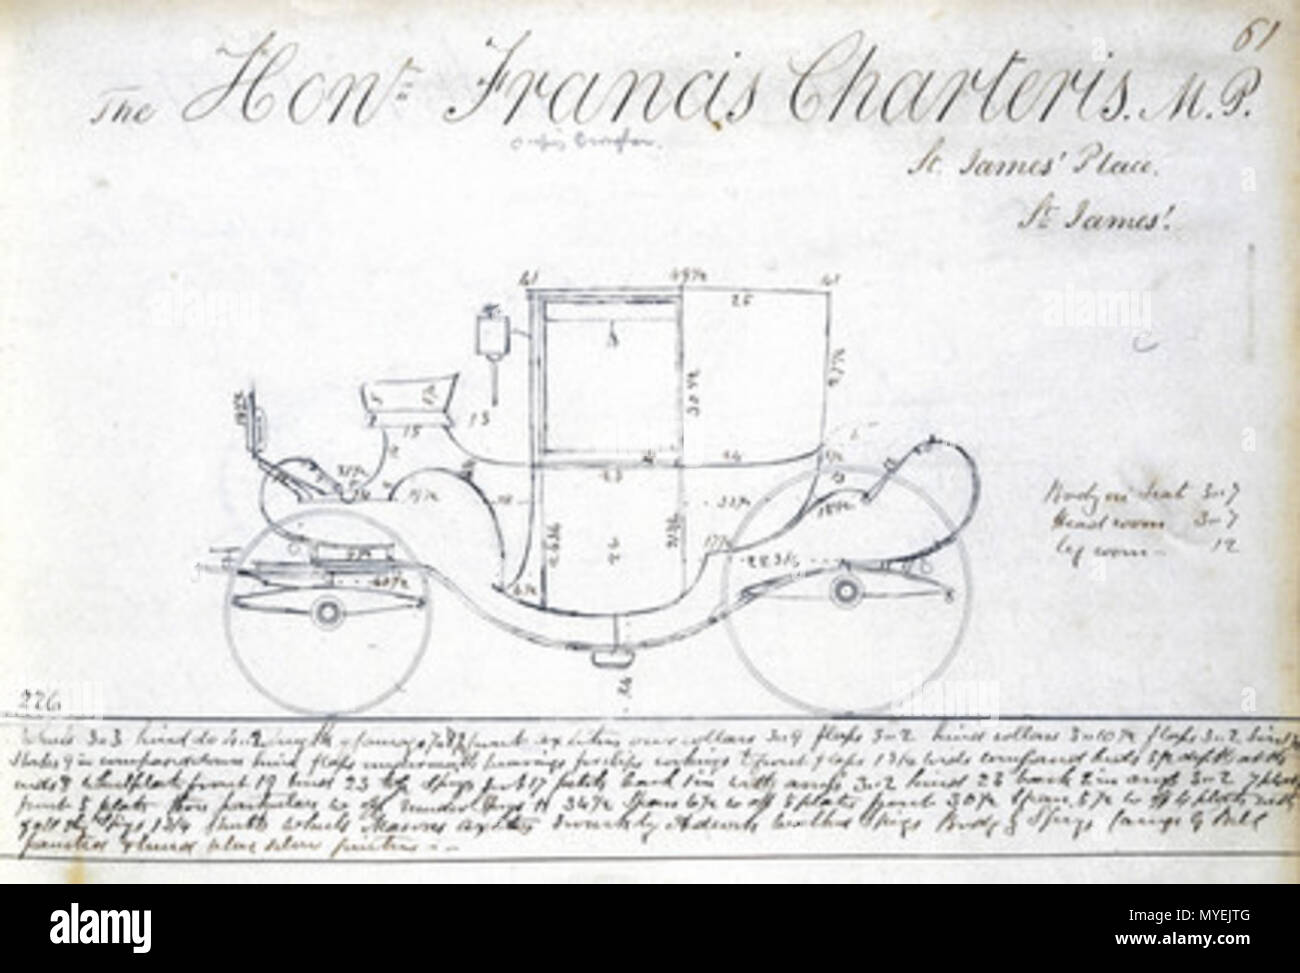 . Francis Charteris' carriage, c 1810-1873 Plate from 'Woodall's Coach Designs', produced between 1810 and 1873, showing a design for a four-wheeled carriage produced for Francis Charteris. 'Woodall's Coach Designs' is a bound volume containing draughtsman's drawings for Woodall the coachmaker of London. 19th century. Unattributed 186 Francis Charteris' carriage, c 1810-1873 Stock Photo